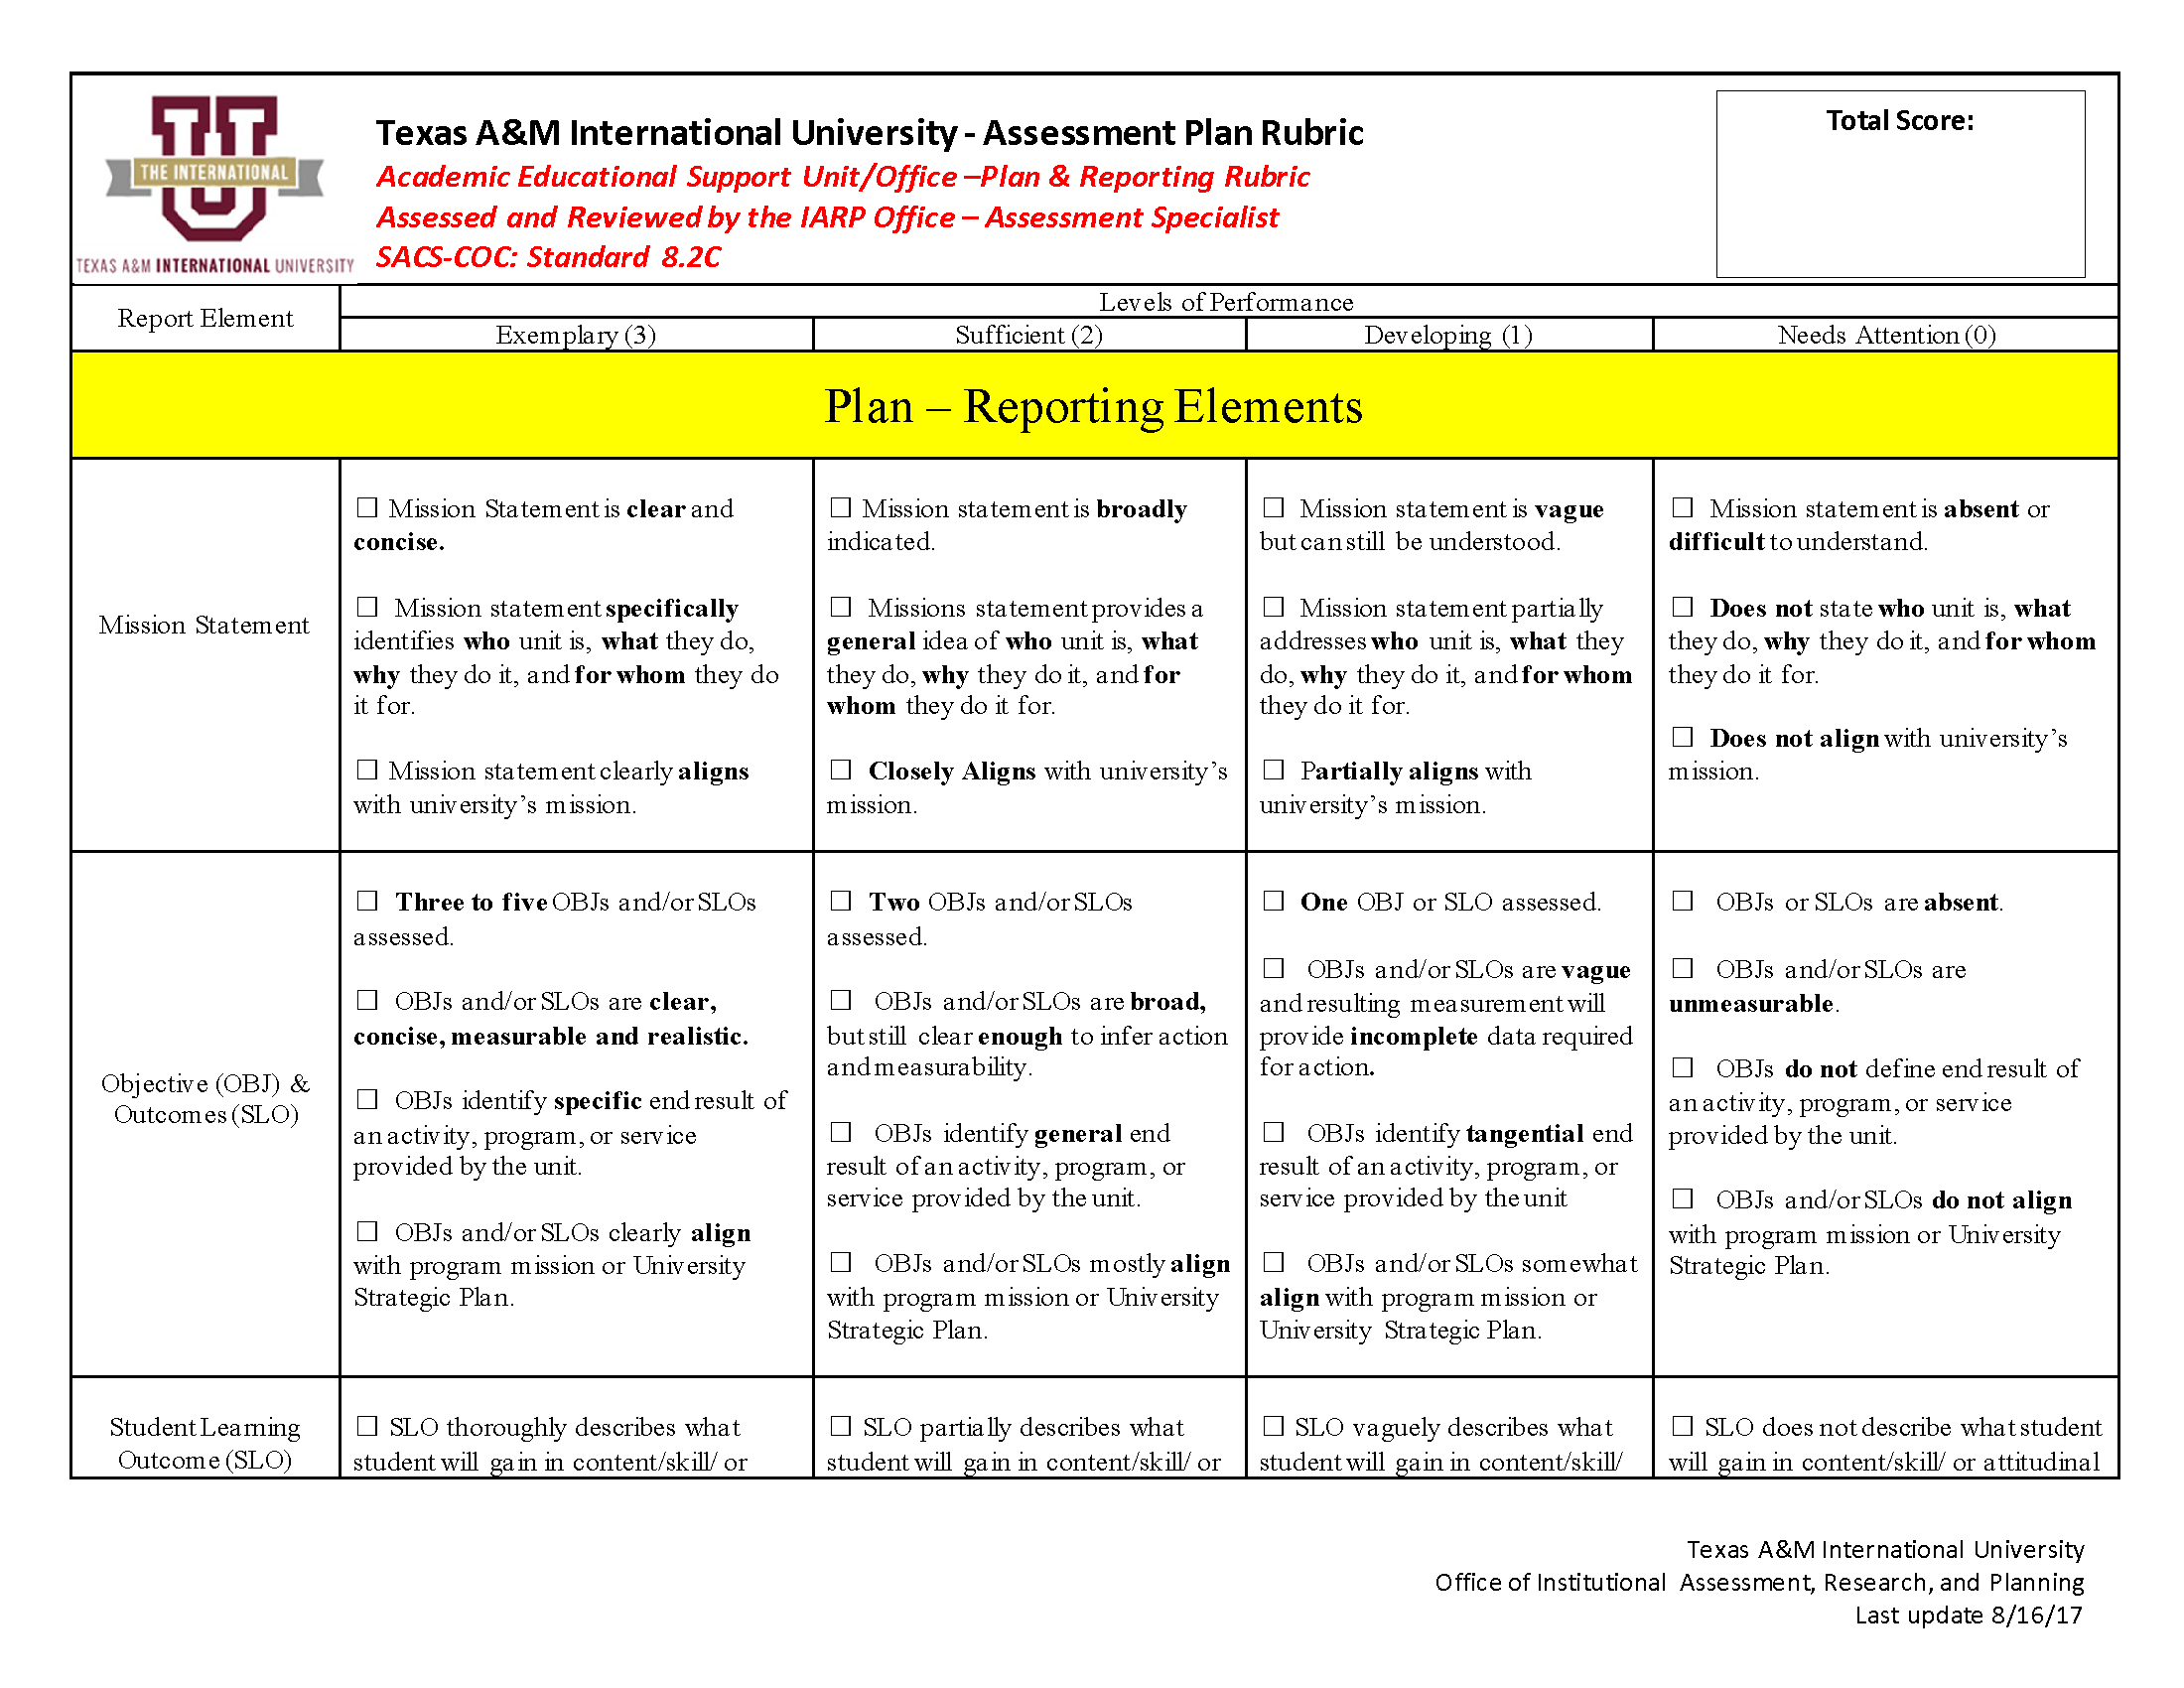 Rubric AES (Plan &amp; Report) 2021 - 2022_ Image